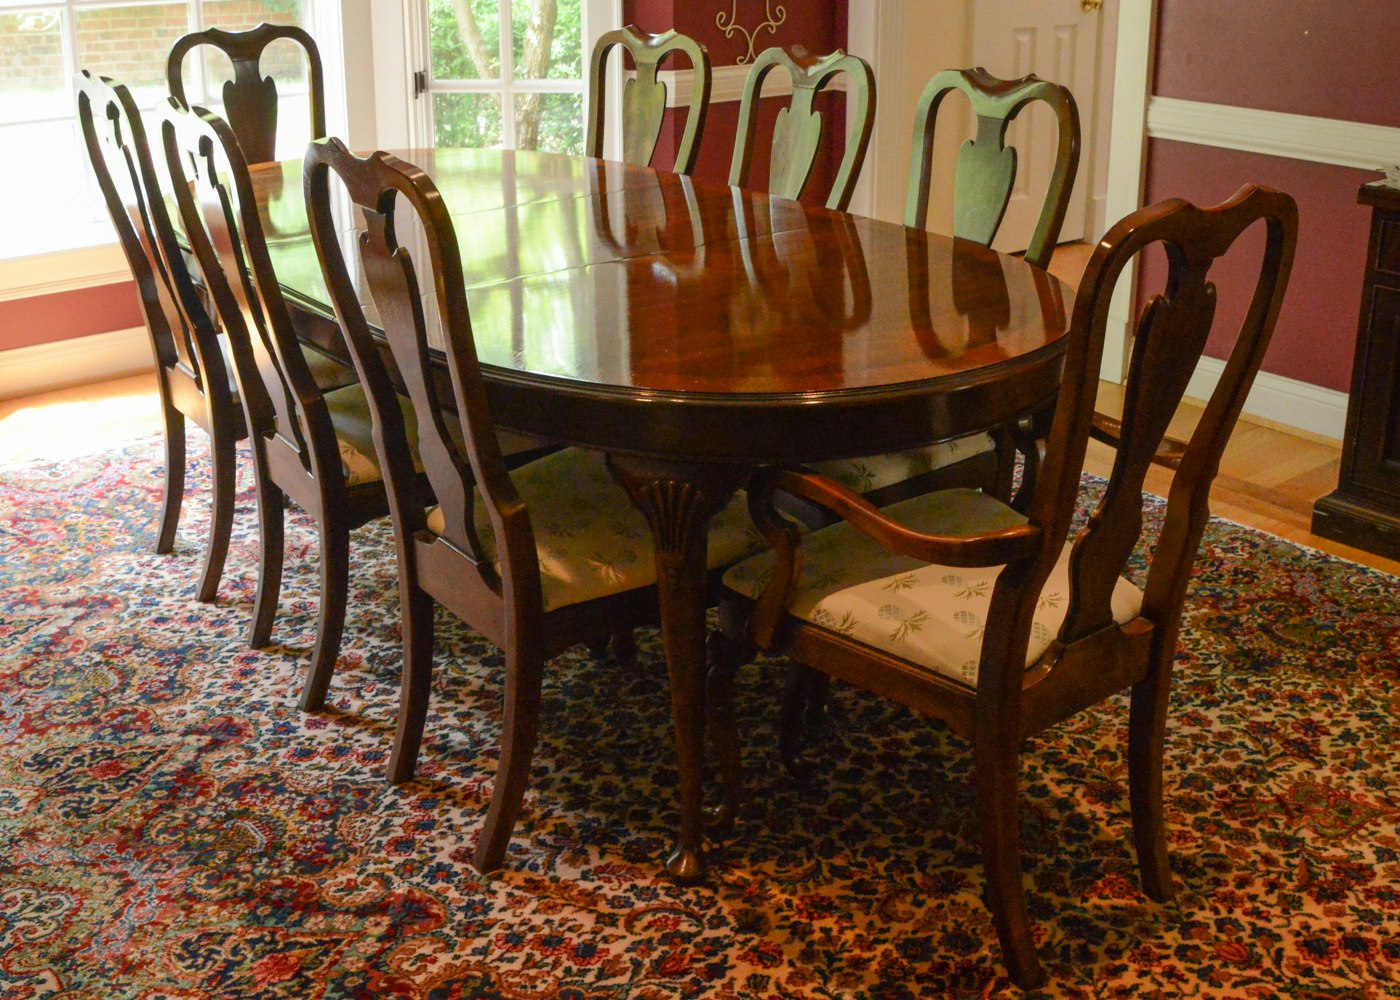 Drexel Heritage Mahogany Dining Room Table and Chairs | EBTH